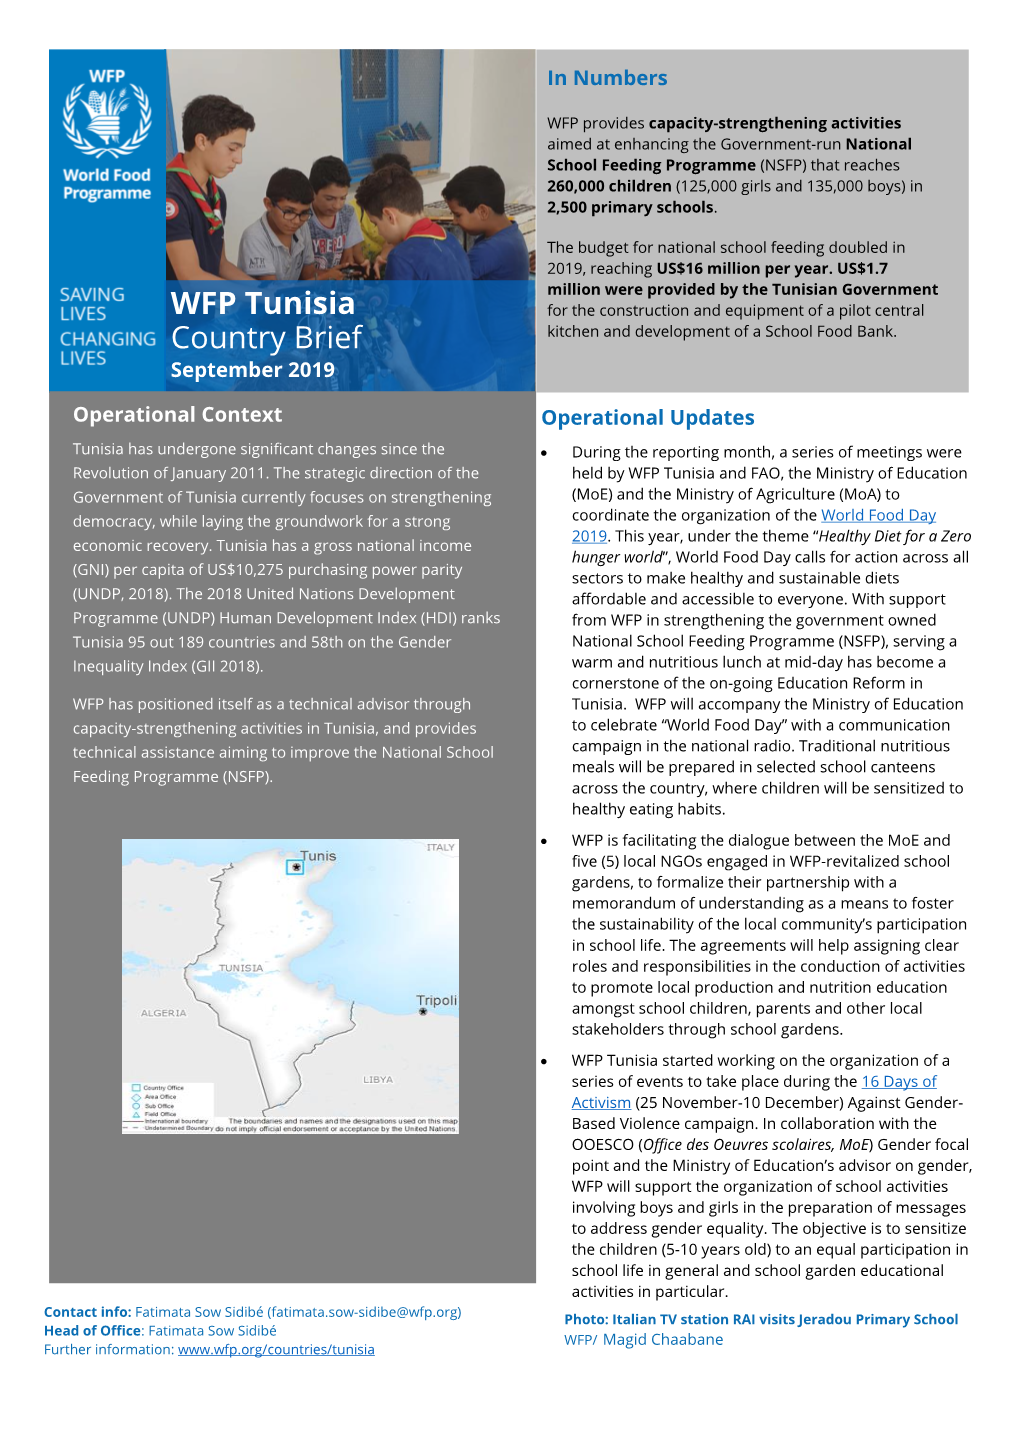 WFP Tunisia Country Brief Italian Agency for Development Cooperation (AICS)